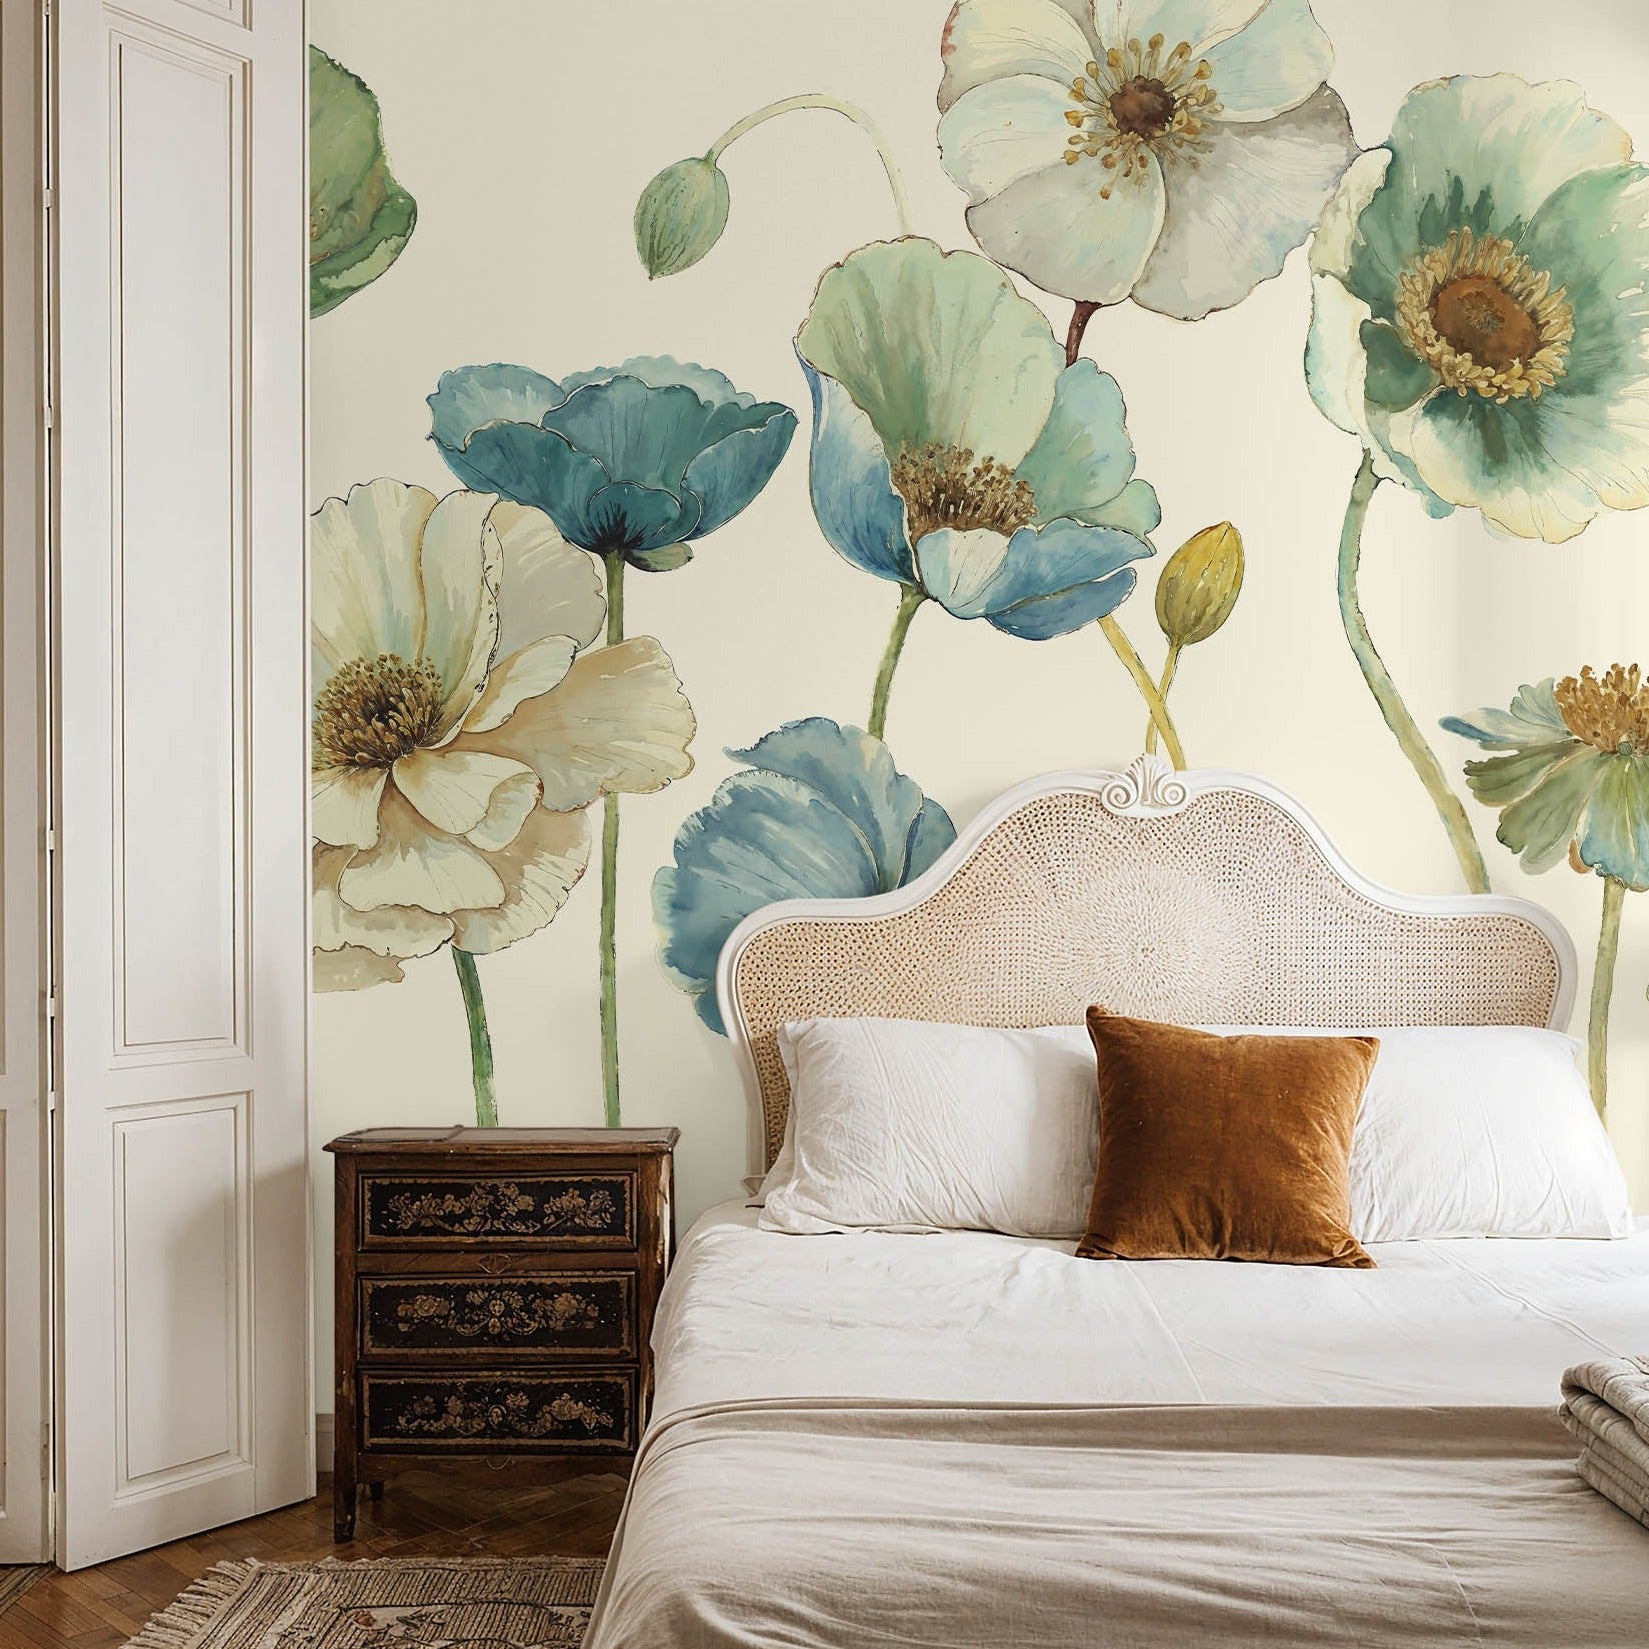 "Meadow Whispers (Cream) Wallpaper by Wall Blush enhancing a cozy bedroom interior with elegant floral design focus."